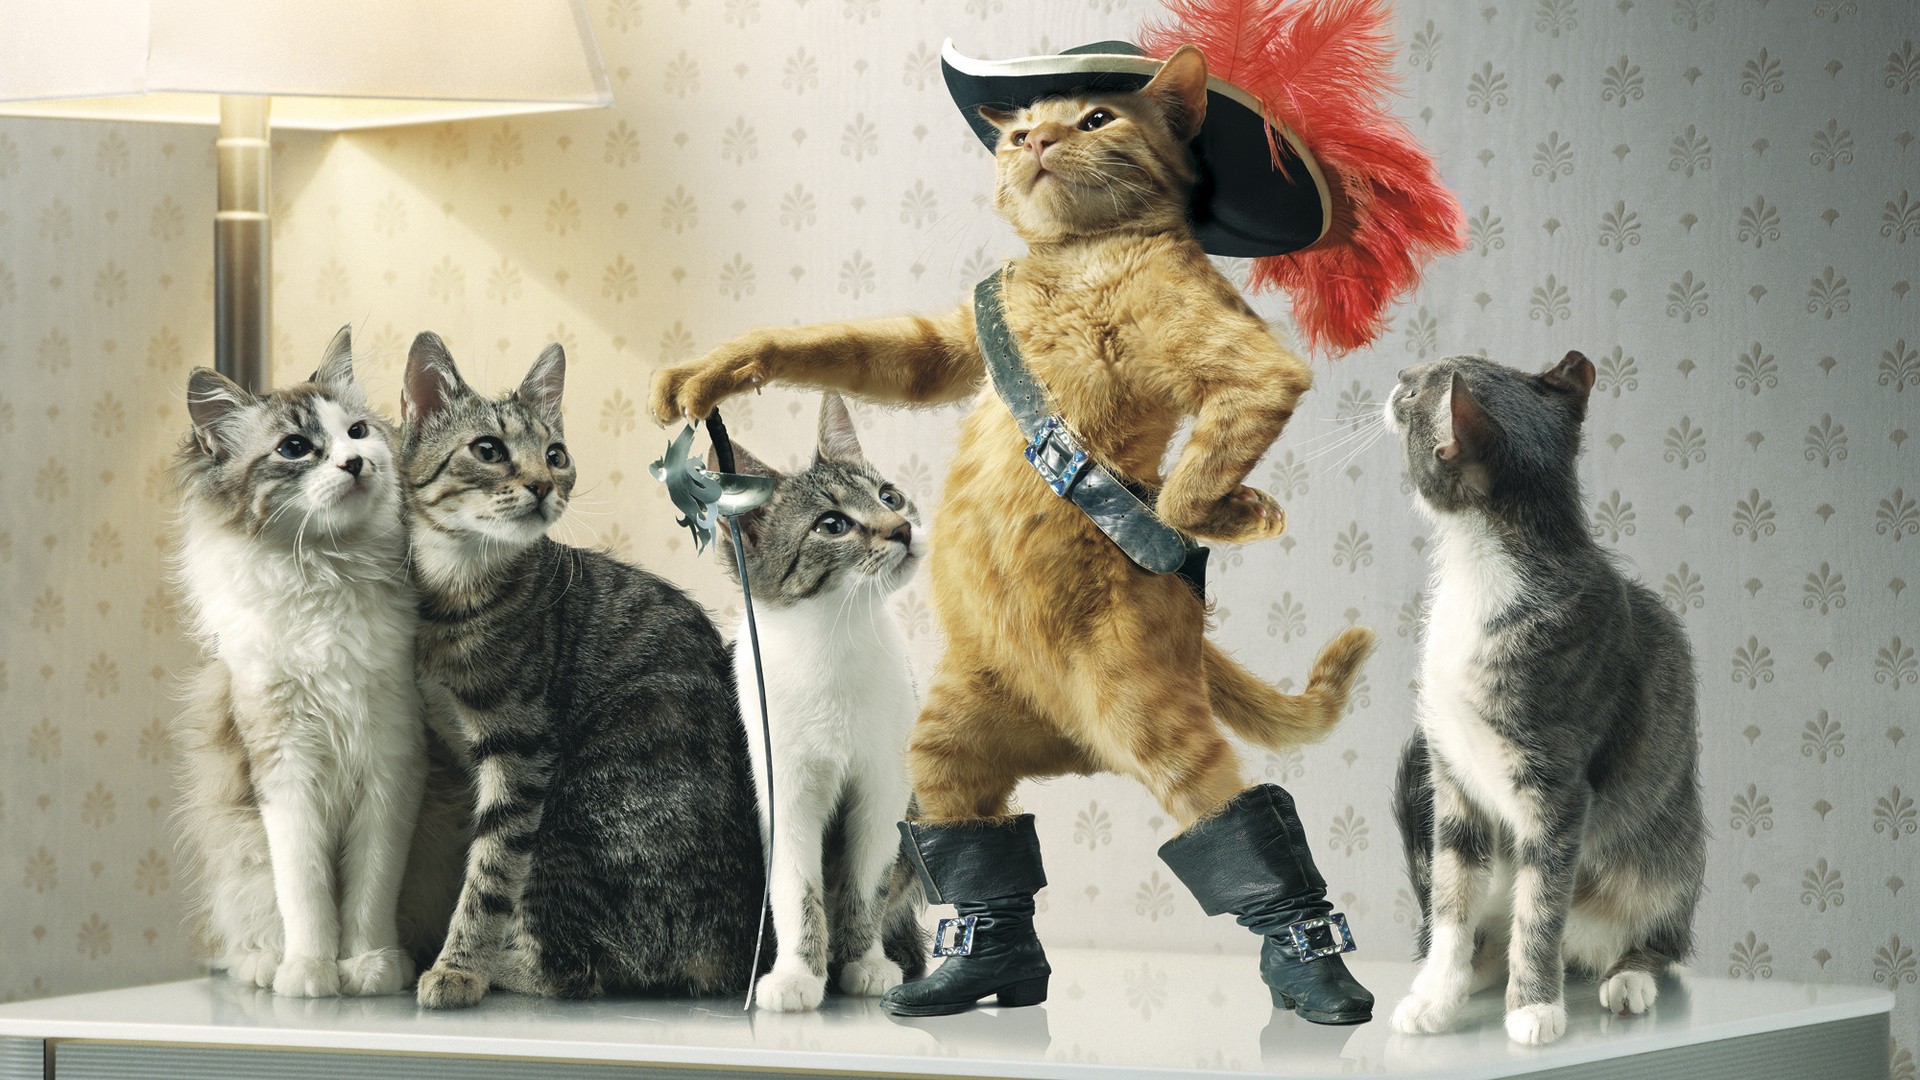 Cats Puss In Boots Photo Manipulation 1920x1080